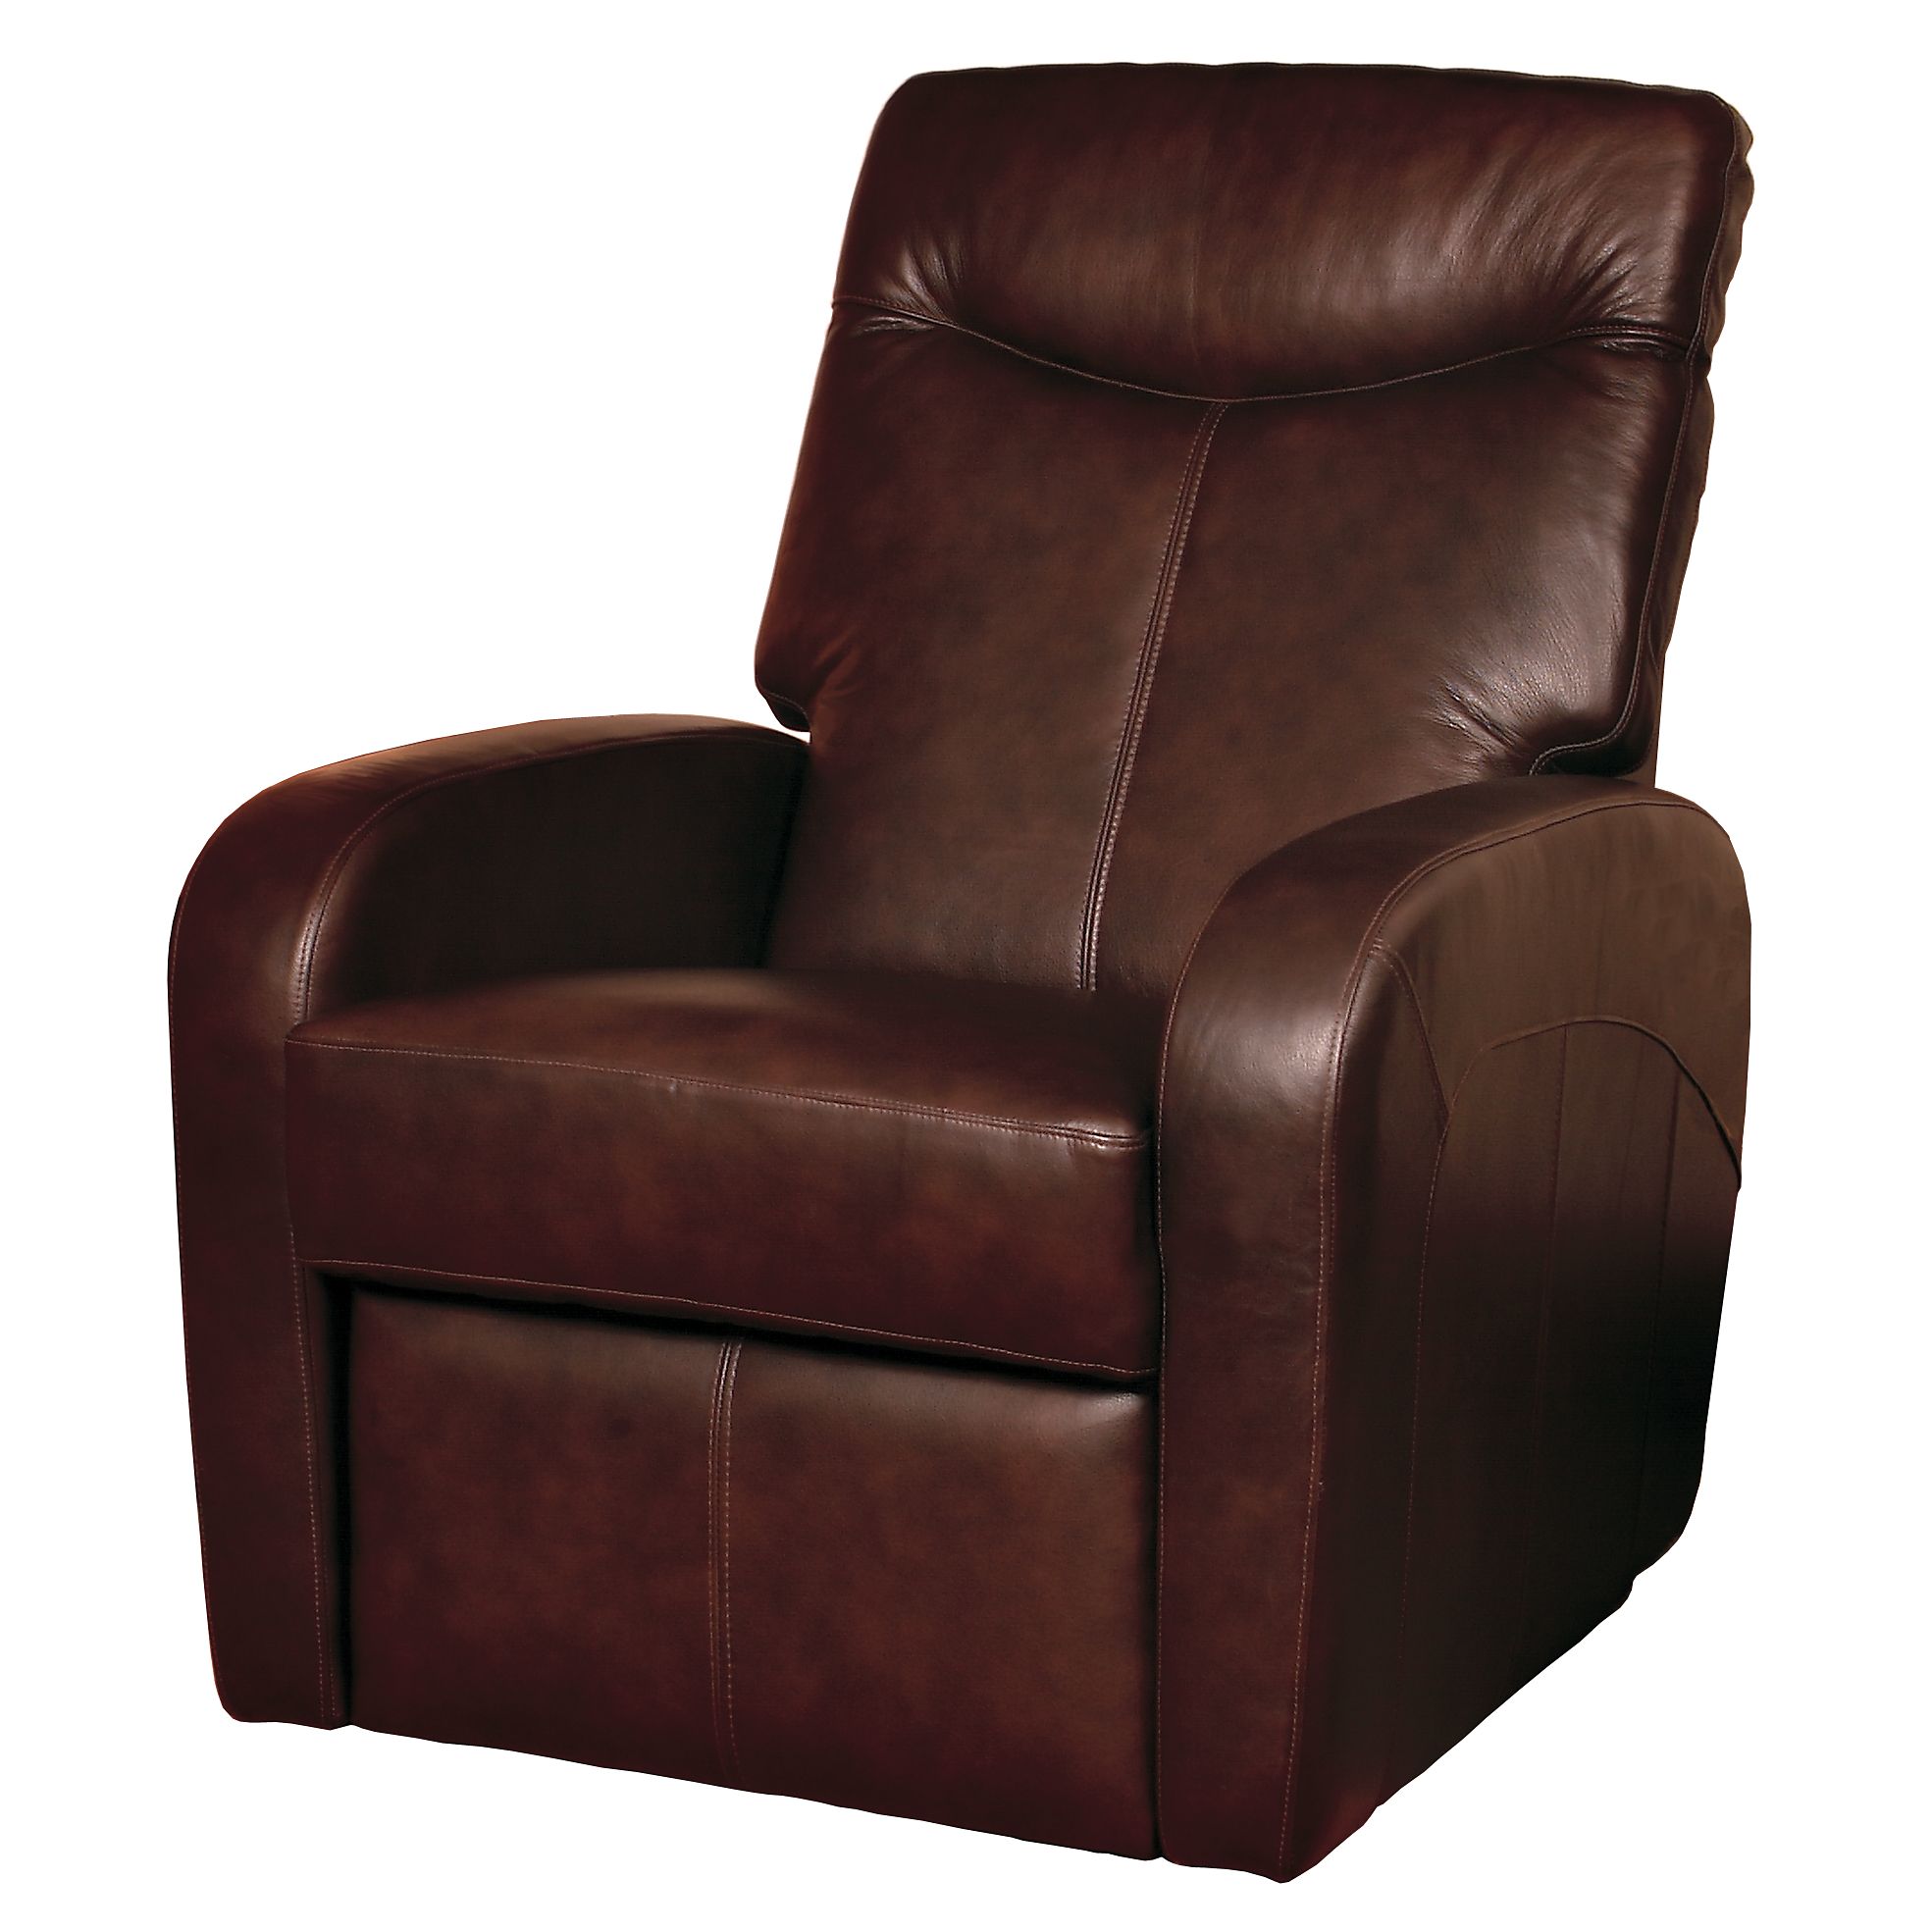 East River Reclining Leather Armchair